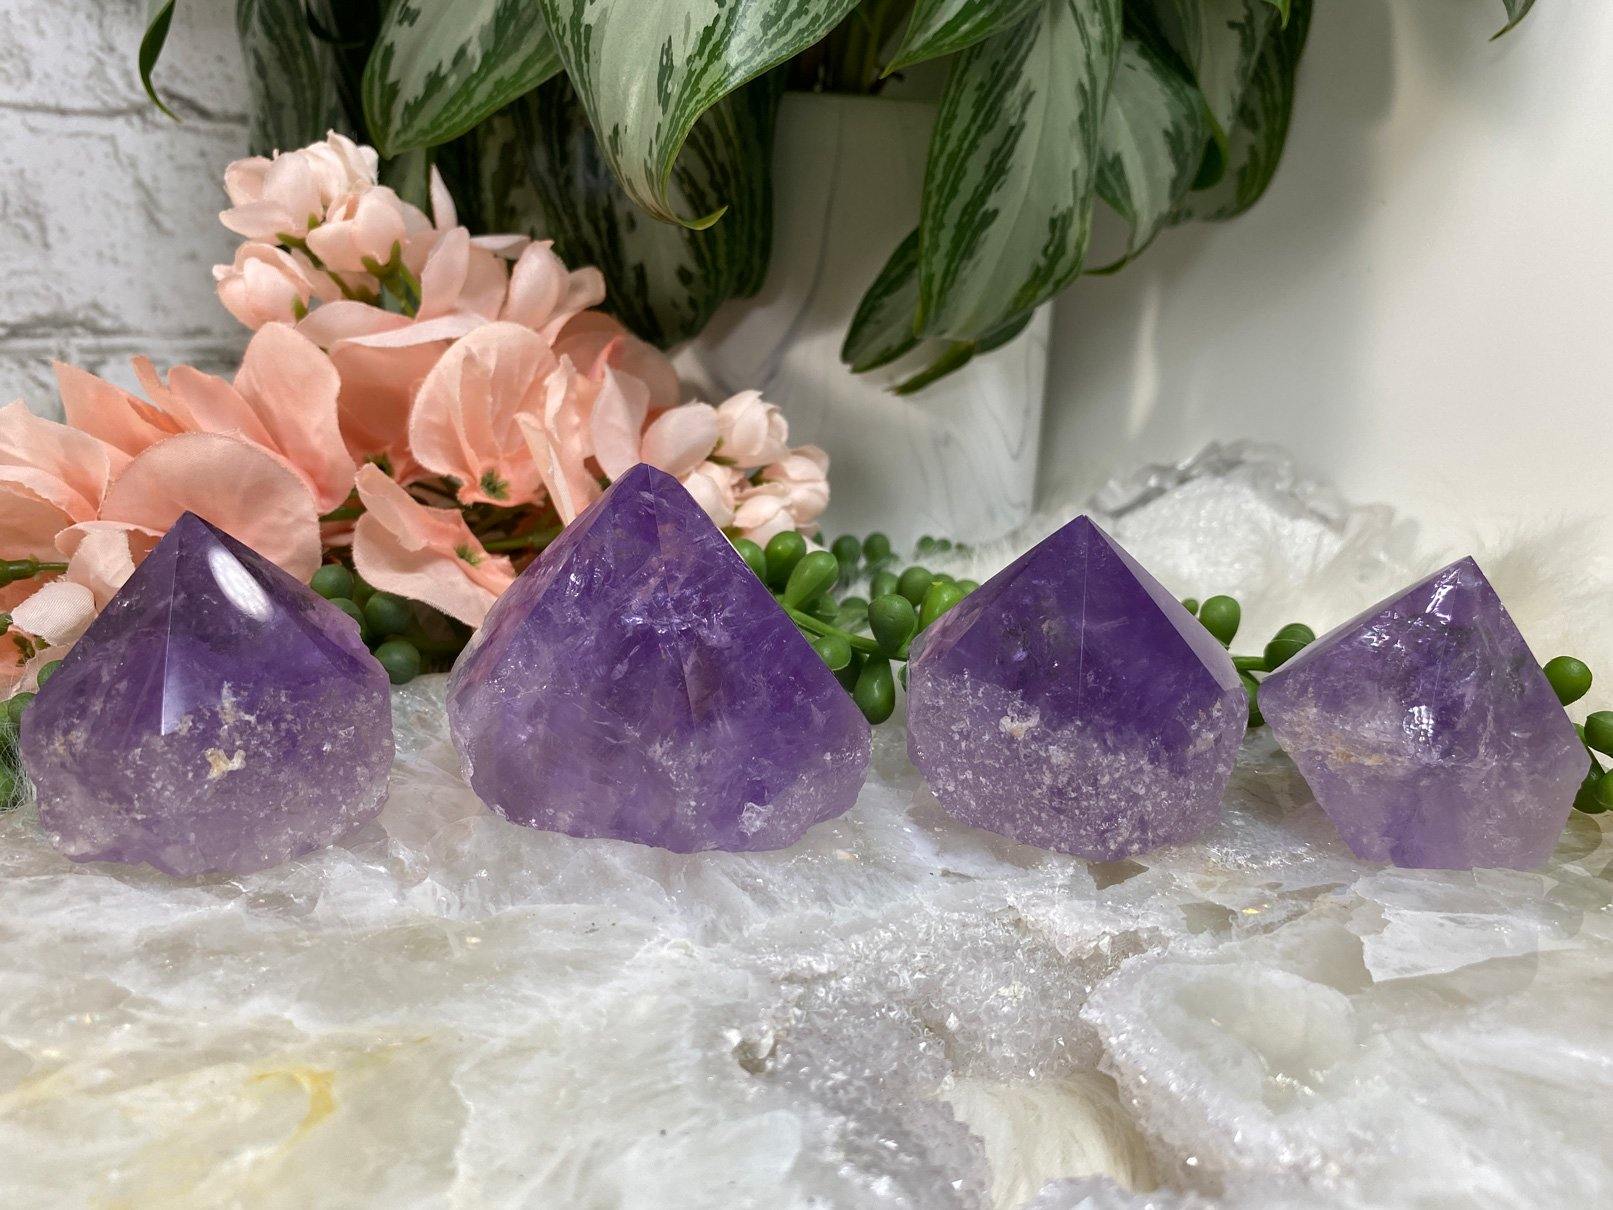 Adorable standing amethyst flames with a great vibrant purple color. 